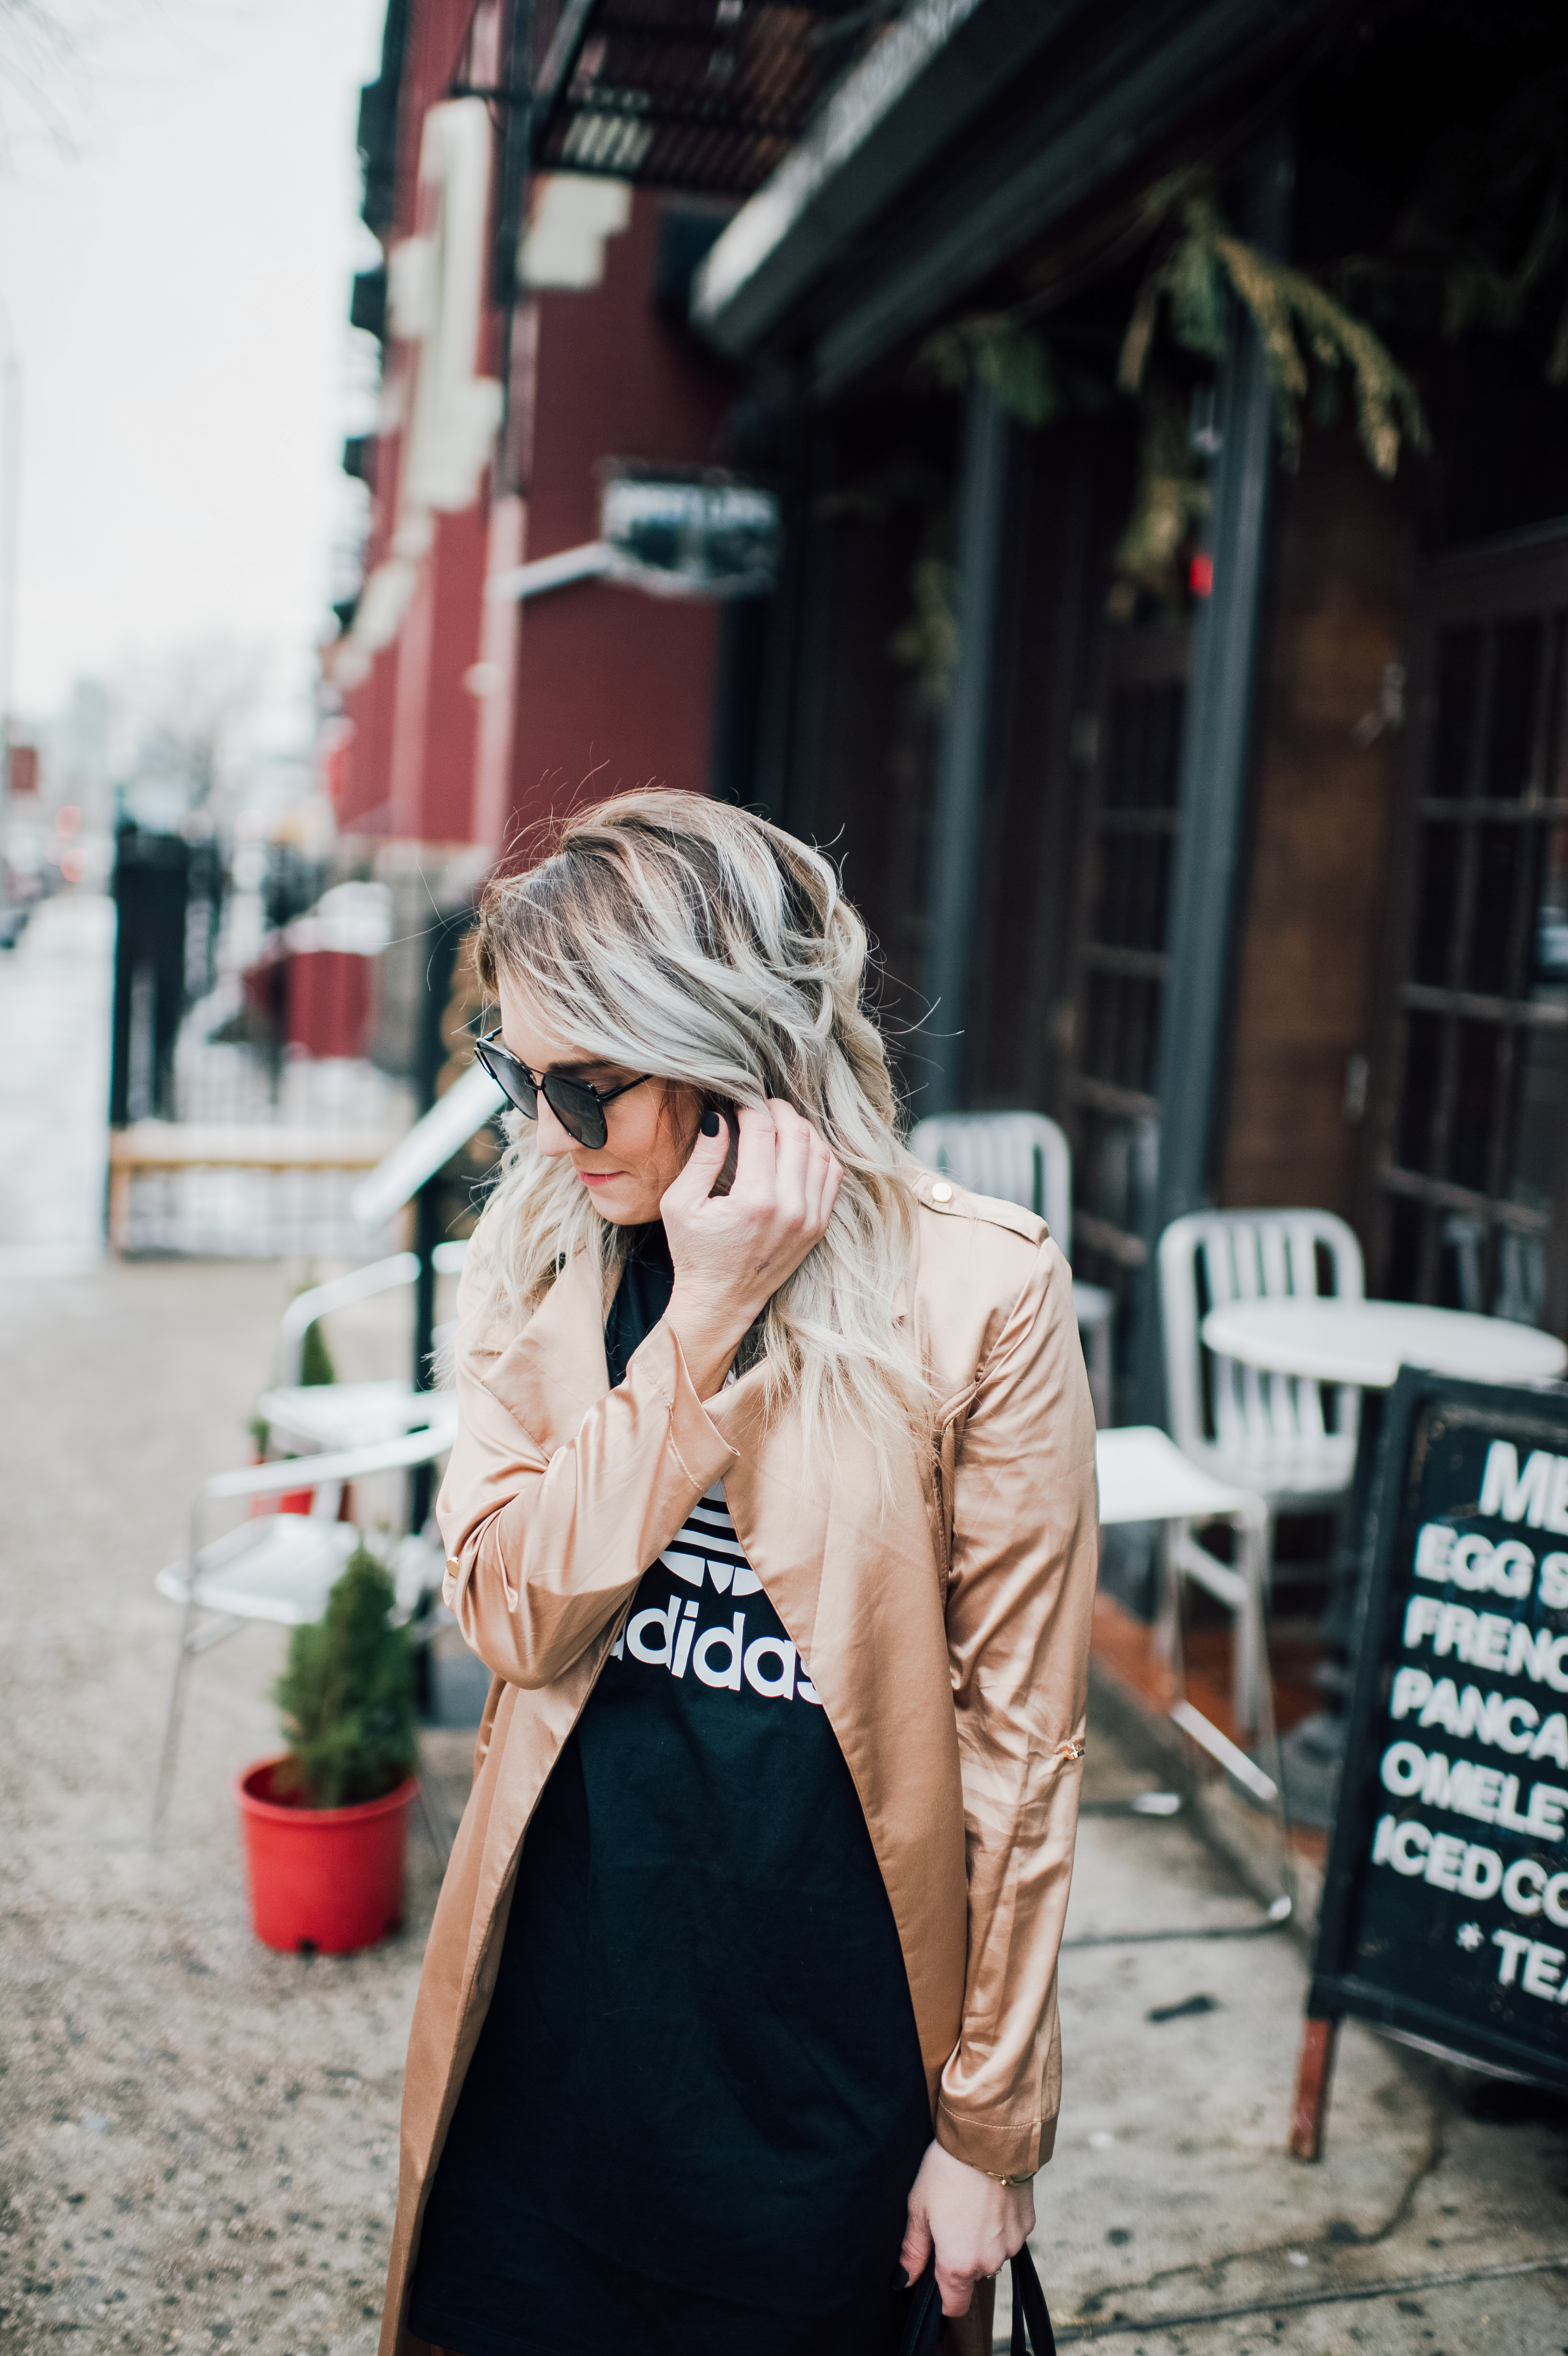 Life and style blogger, The Samantha Show, shares how to style a t-shirt dress. A t-shirt dress is an easy style to dress up or dress down.